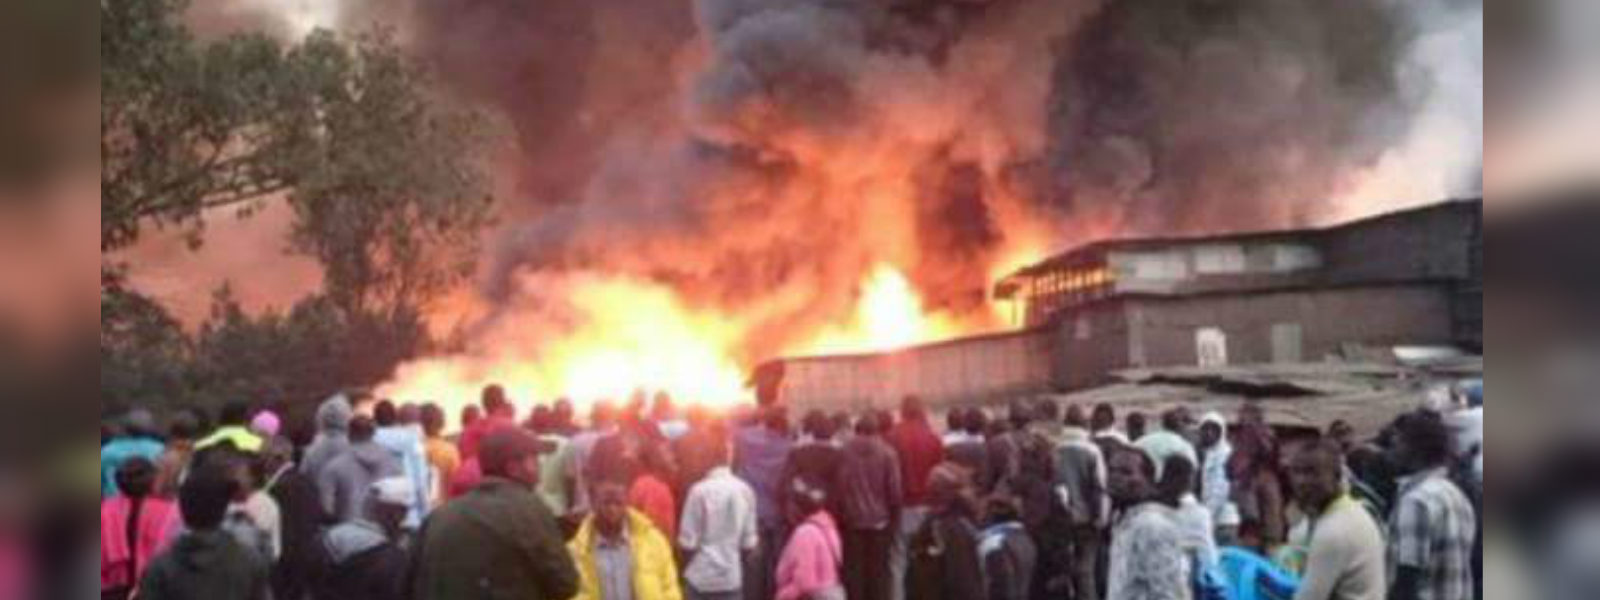 Fire in Nairobi claims lives of 15 and injures 70